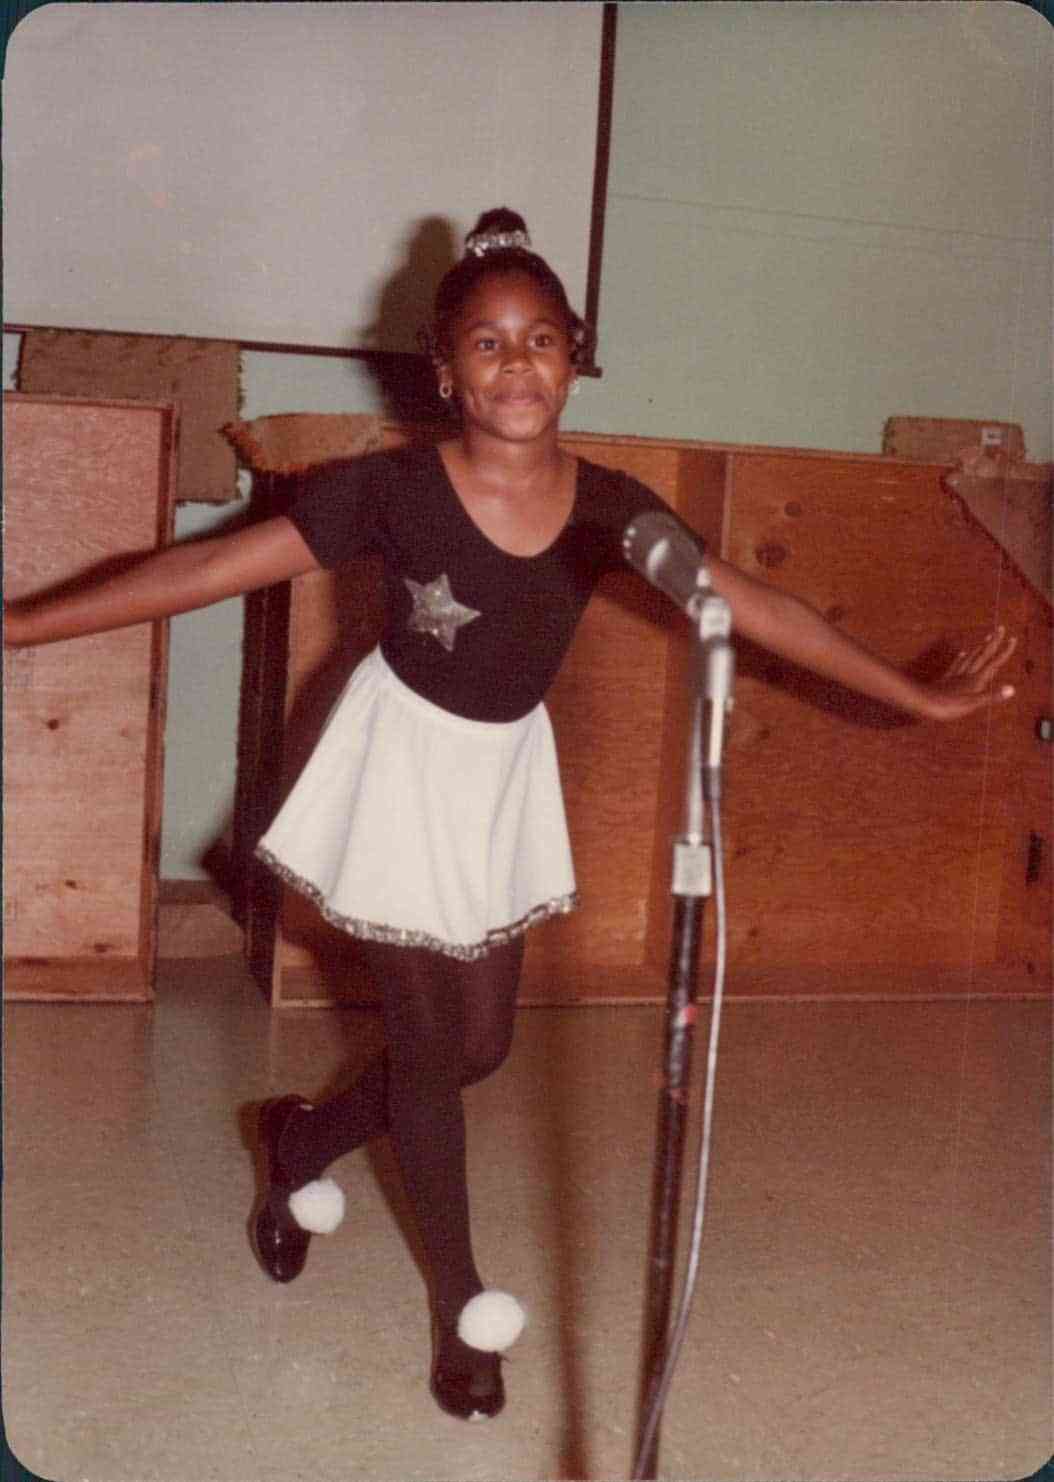 Alisa as a child, wearing a ballet outfit and standing in front of a microphone.